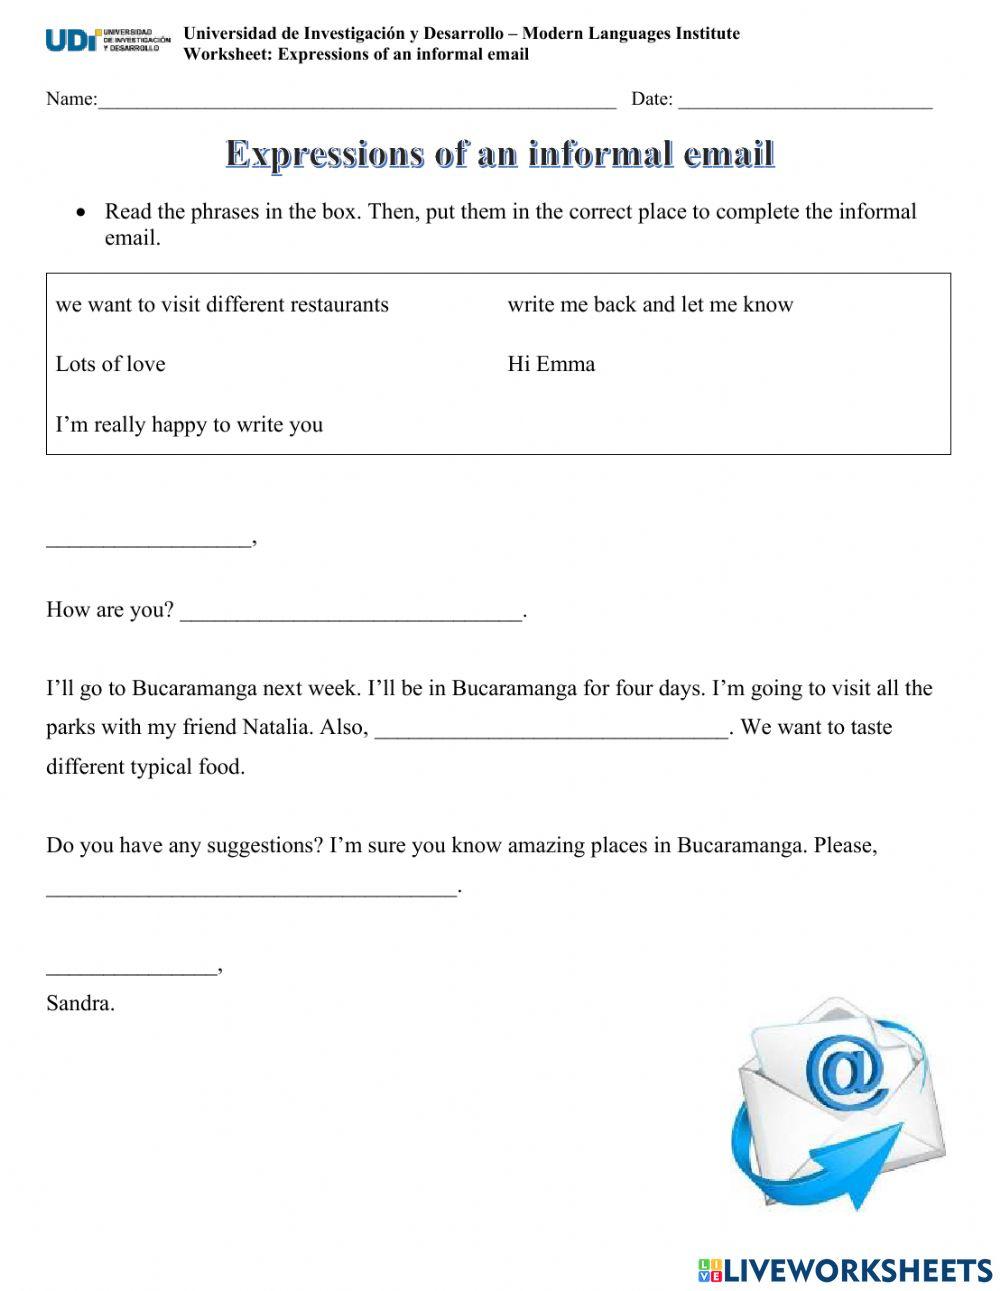 Informal email - expressions